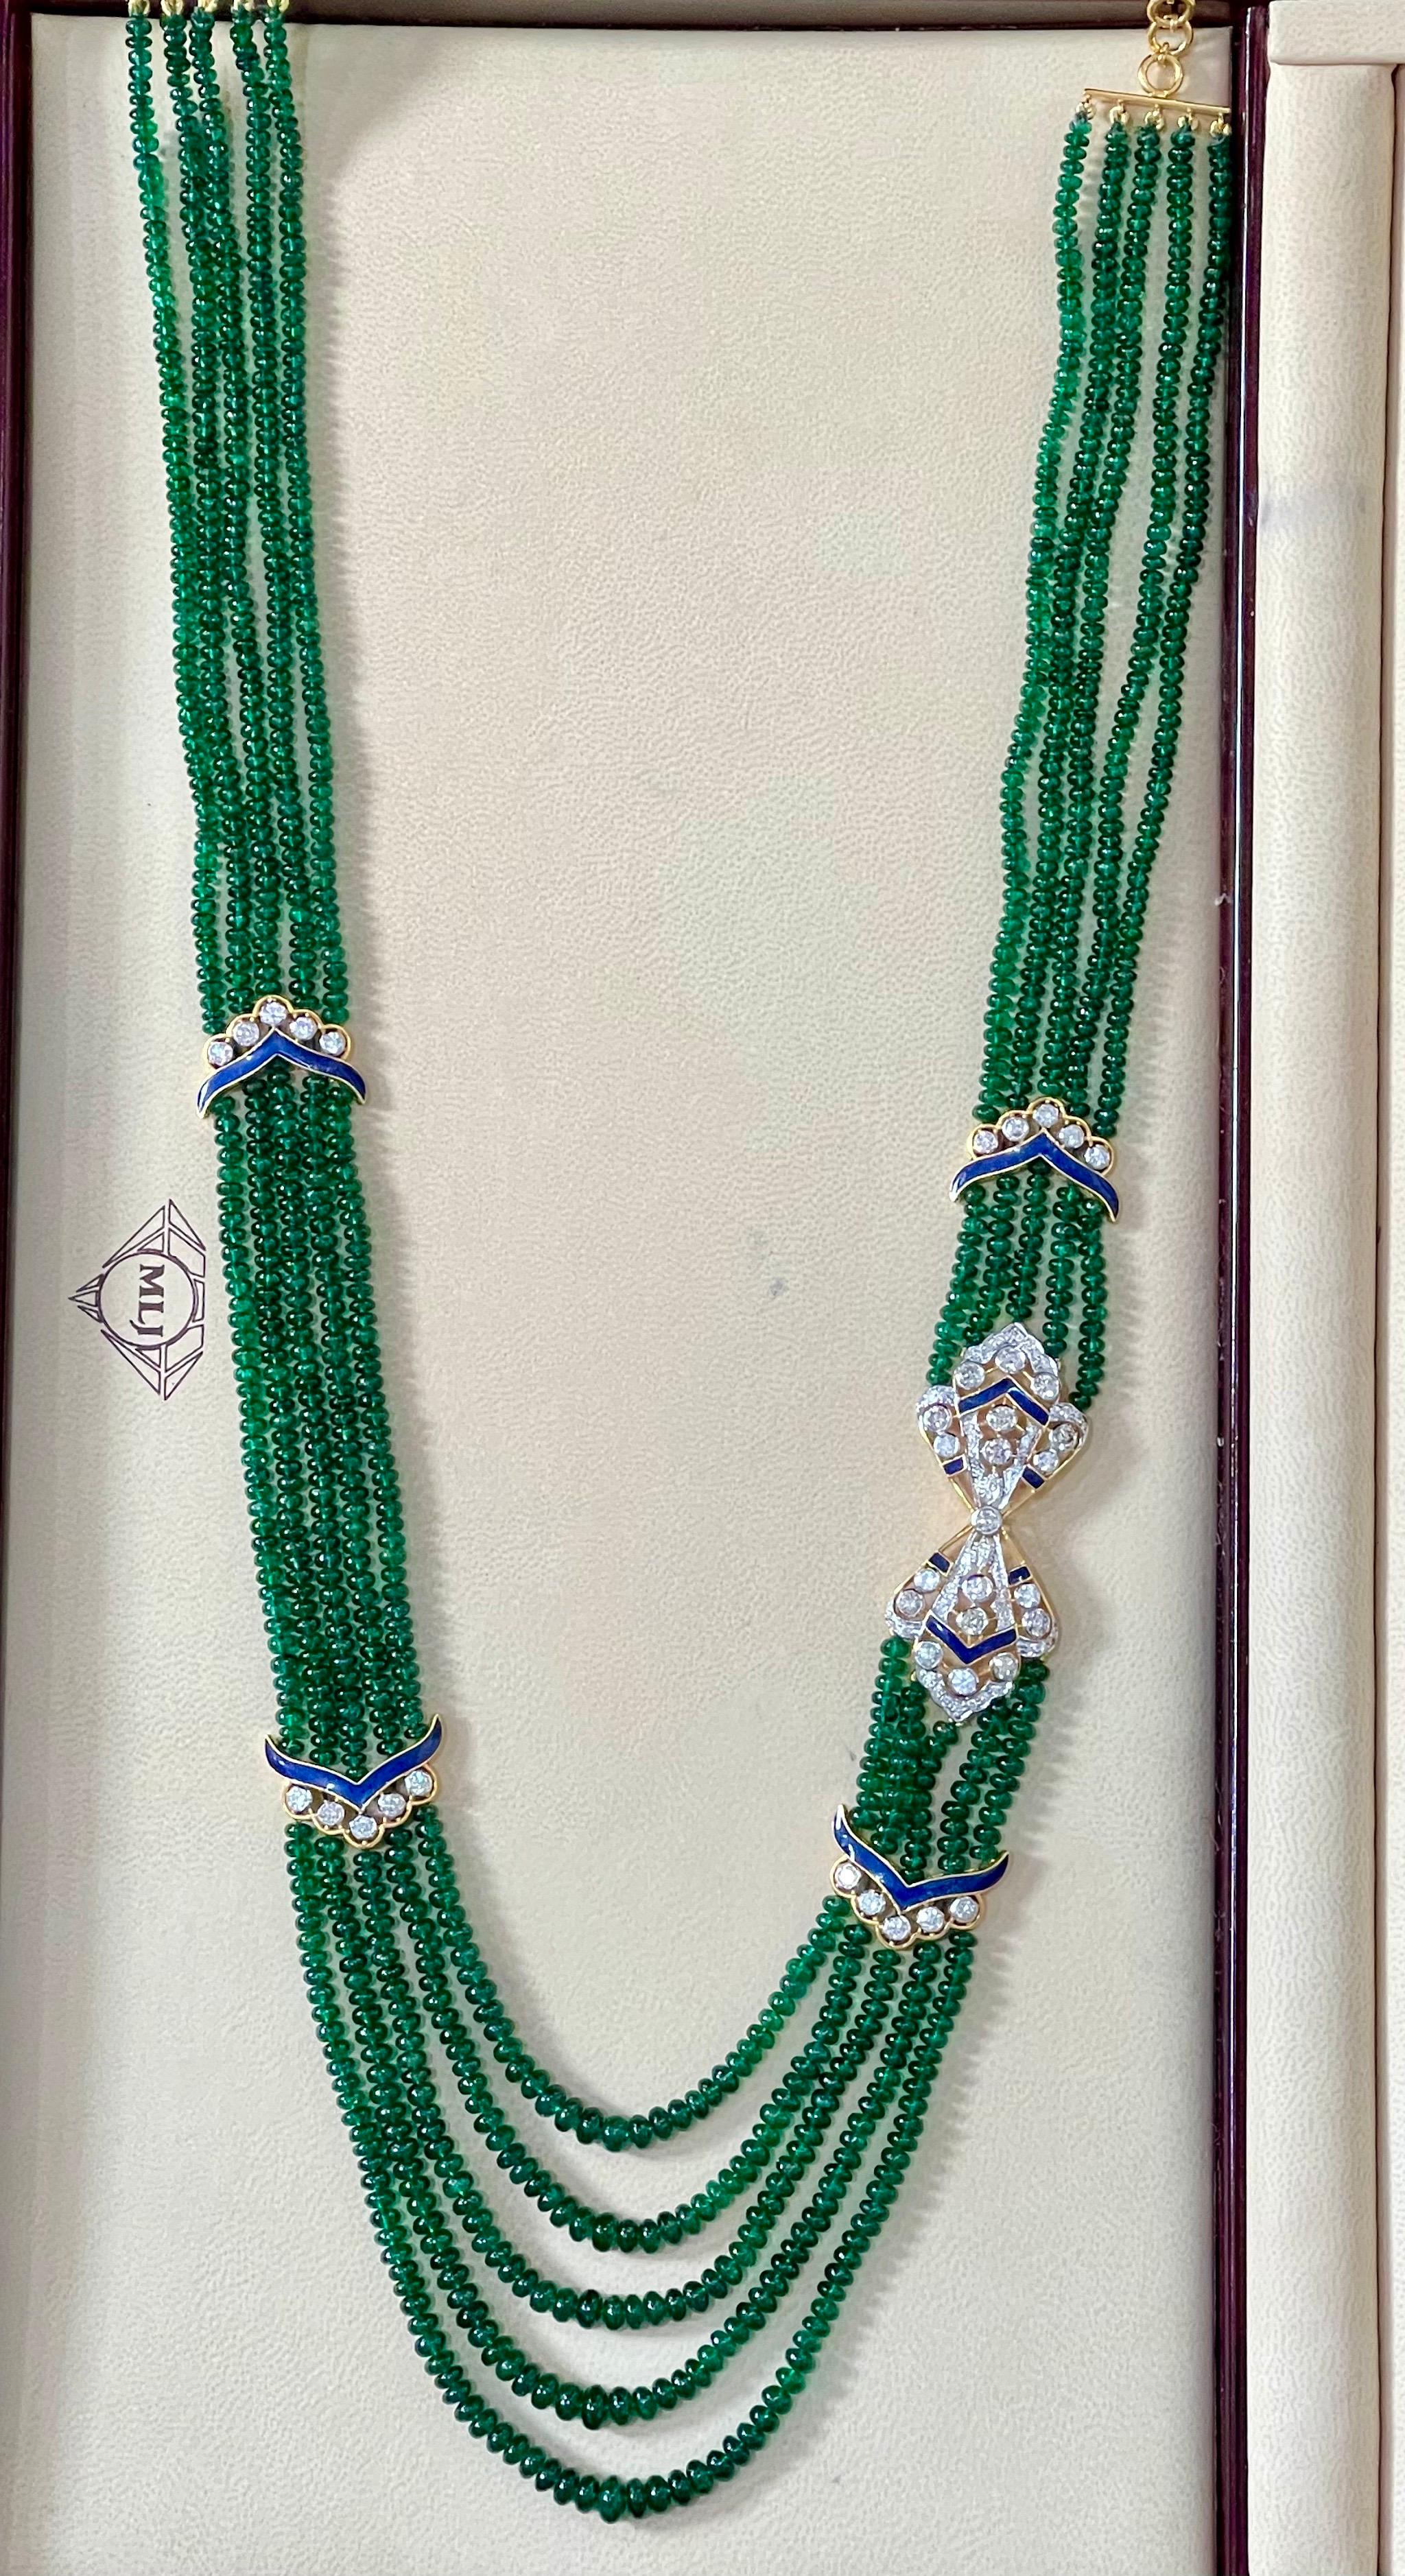 300 Carat 5-Strand Emerald Necklace with 4.8 Carat Diamond & Enamel in 14k Gold For Sale 3